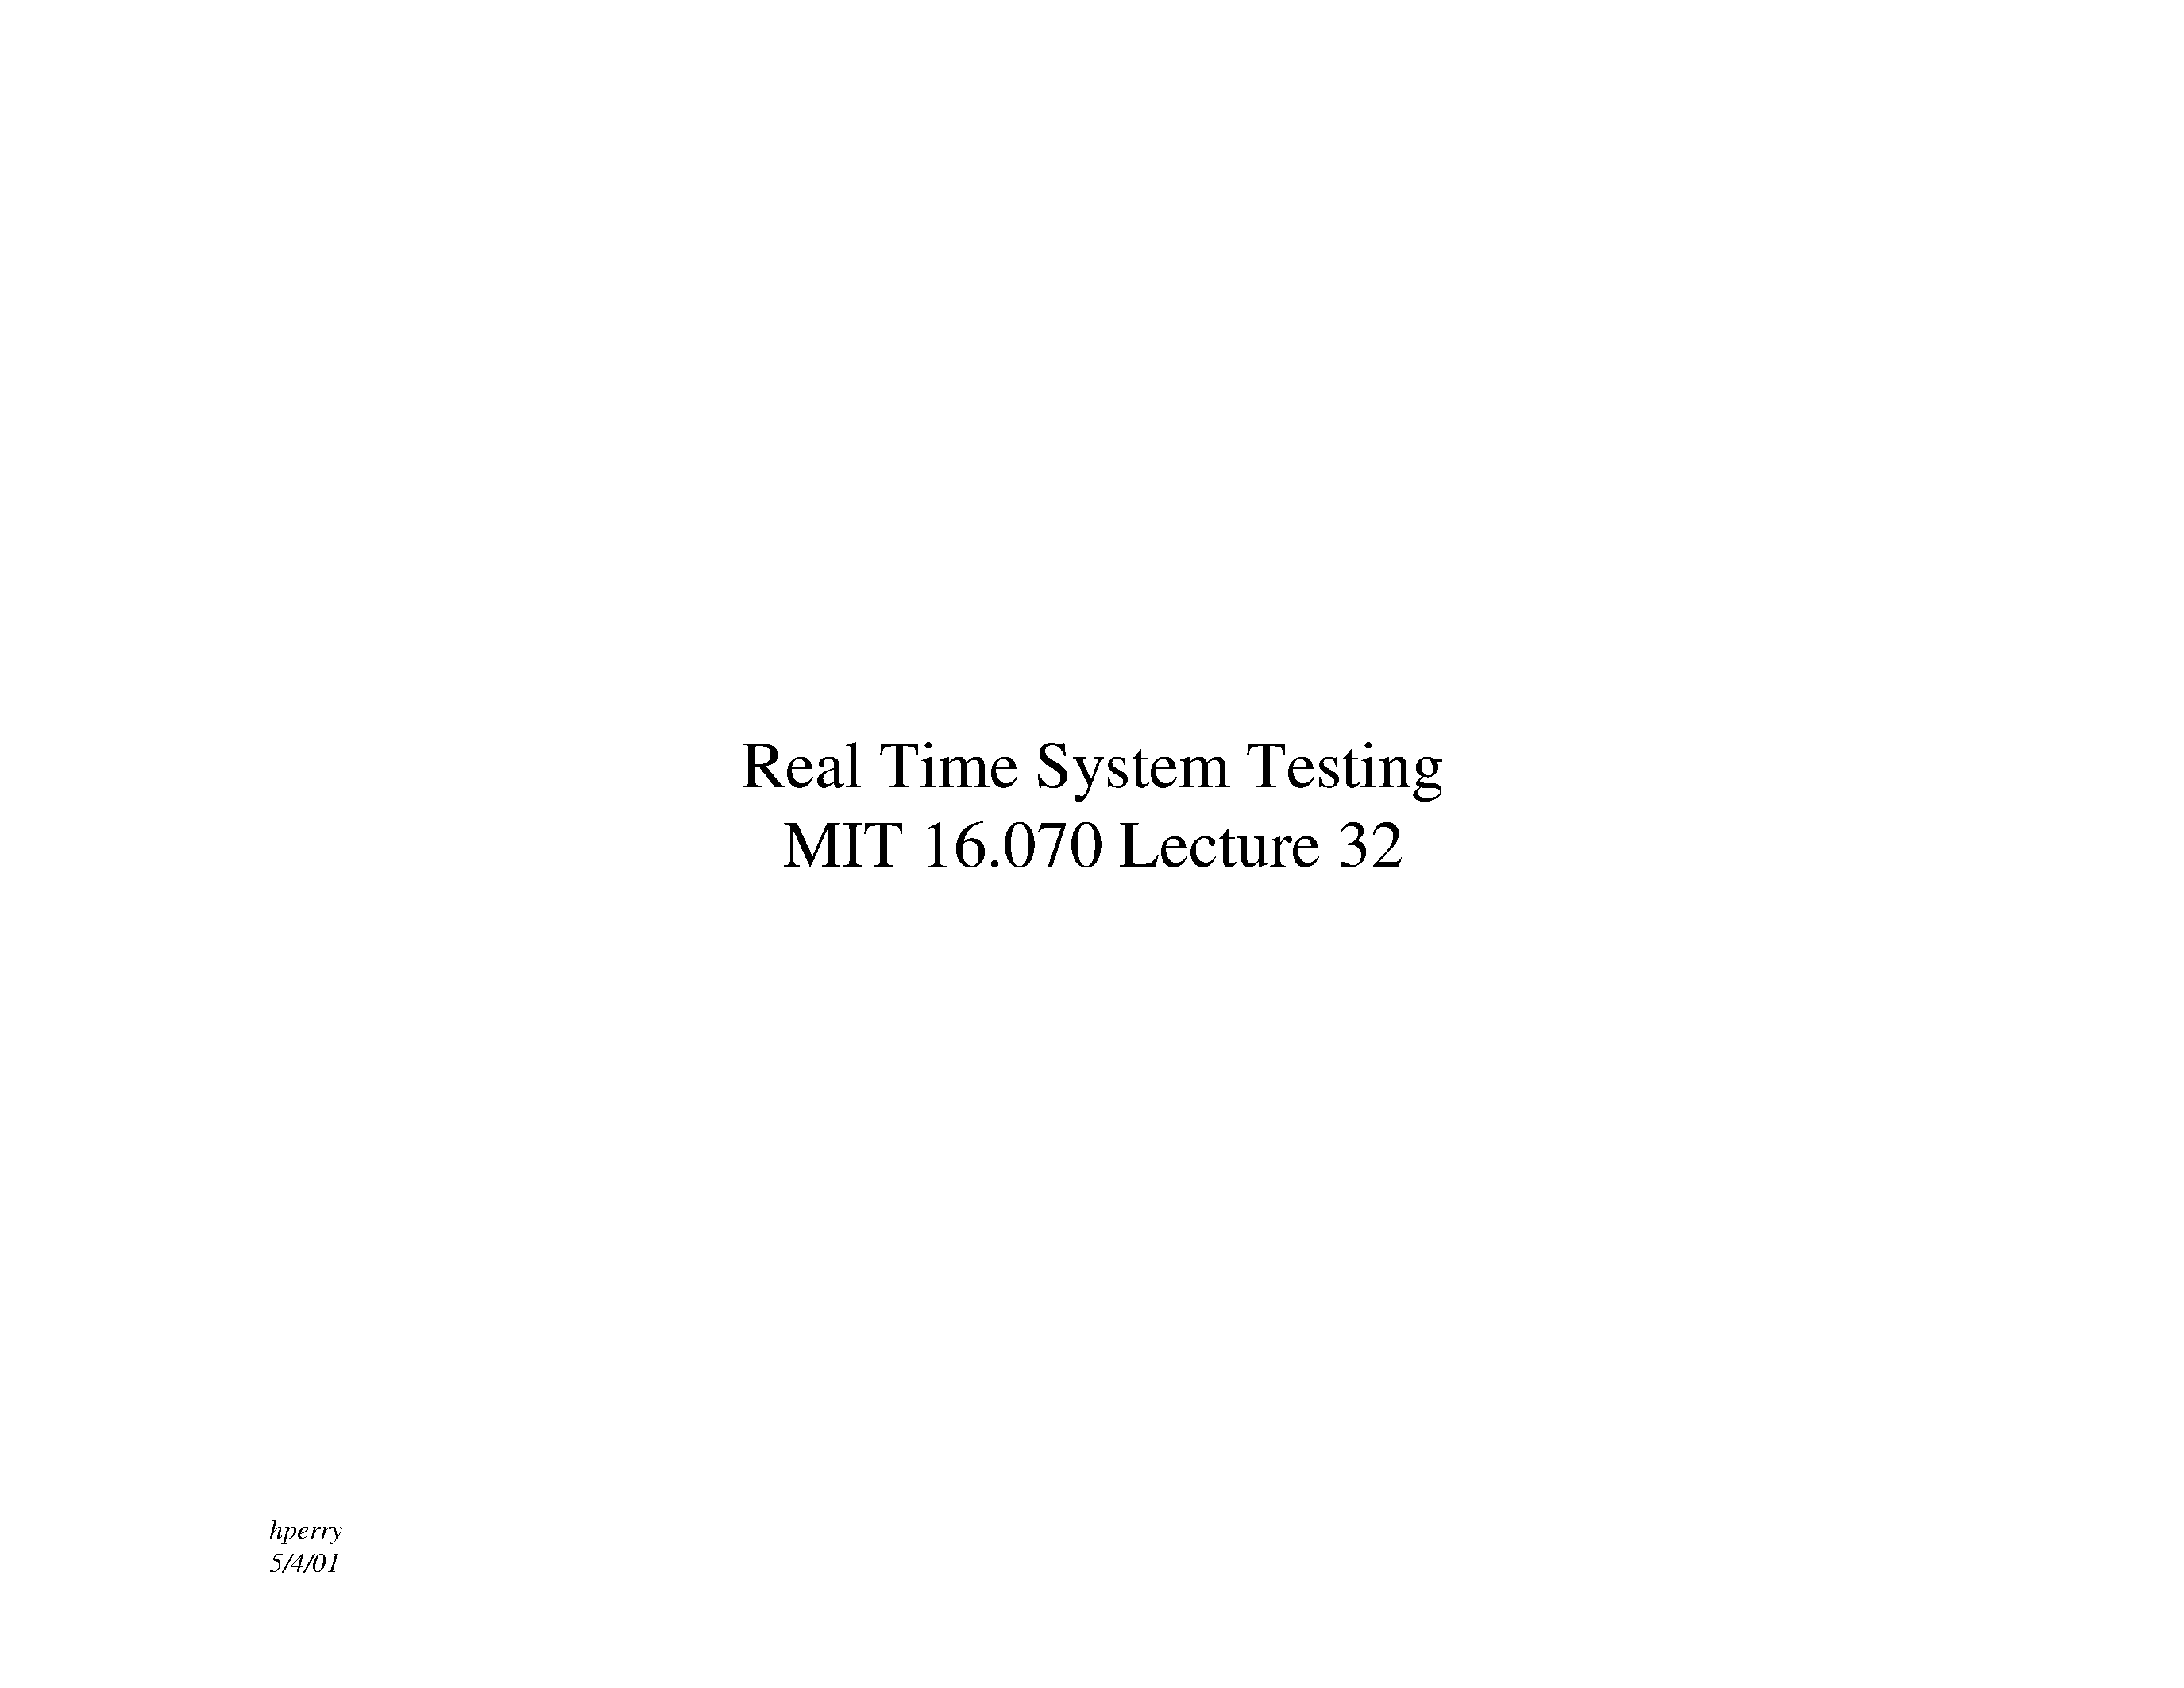 Datasheet TL32 - Real Time System Testing MIT 16.070 Lecture 32 page 1